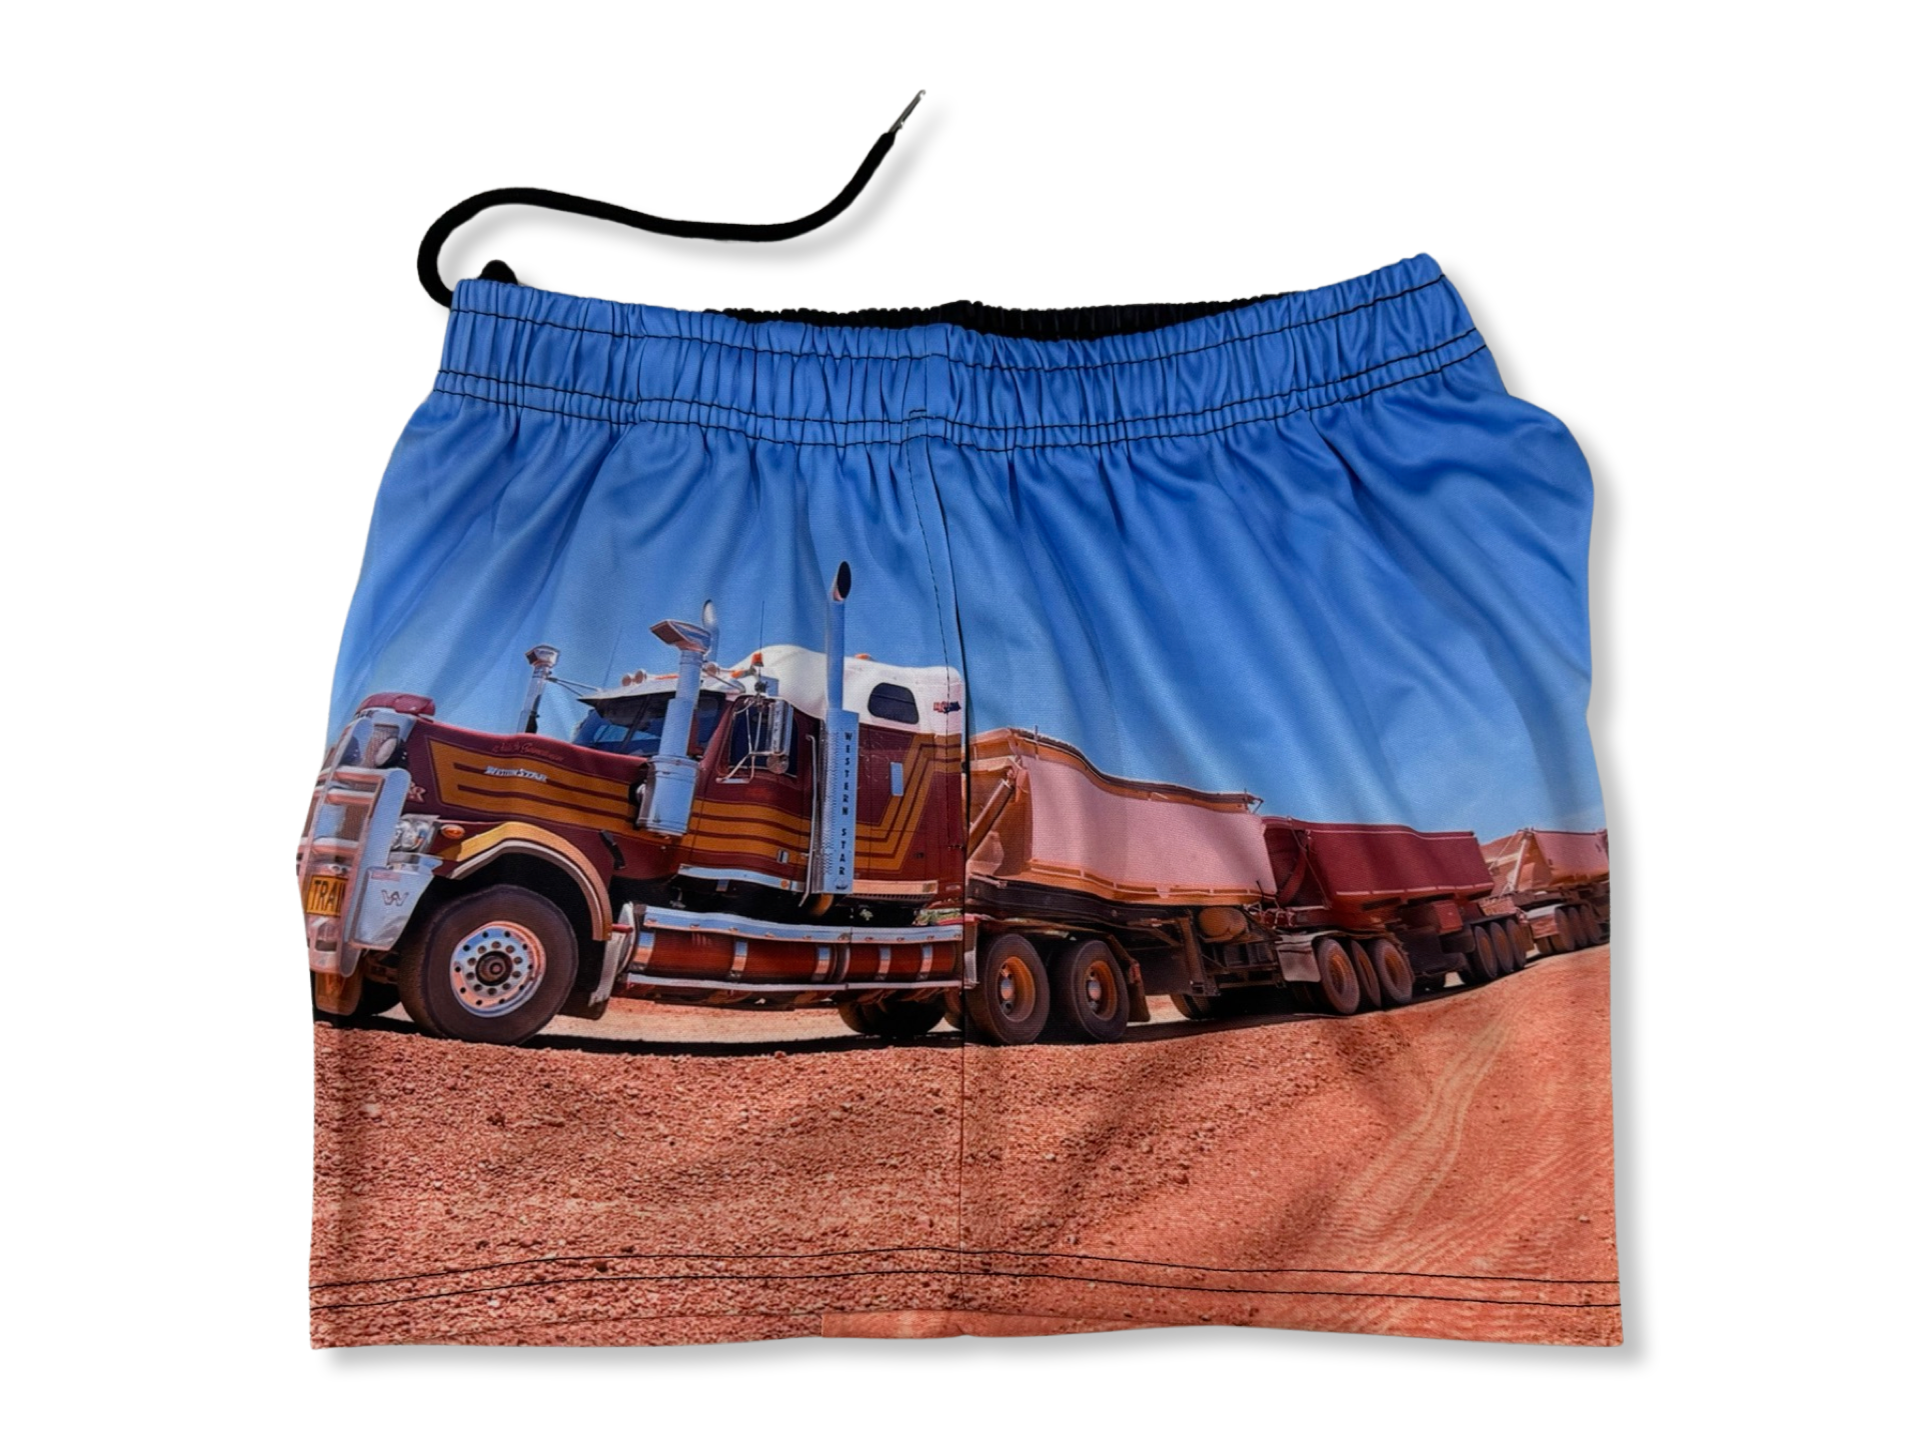 🔥NEW🔥 COPY NORTHBOUND- Footy Shorts (With Pockets)